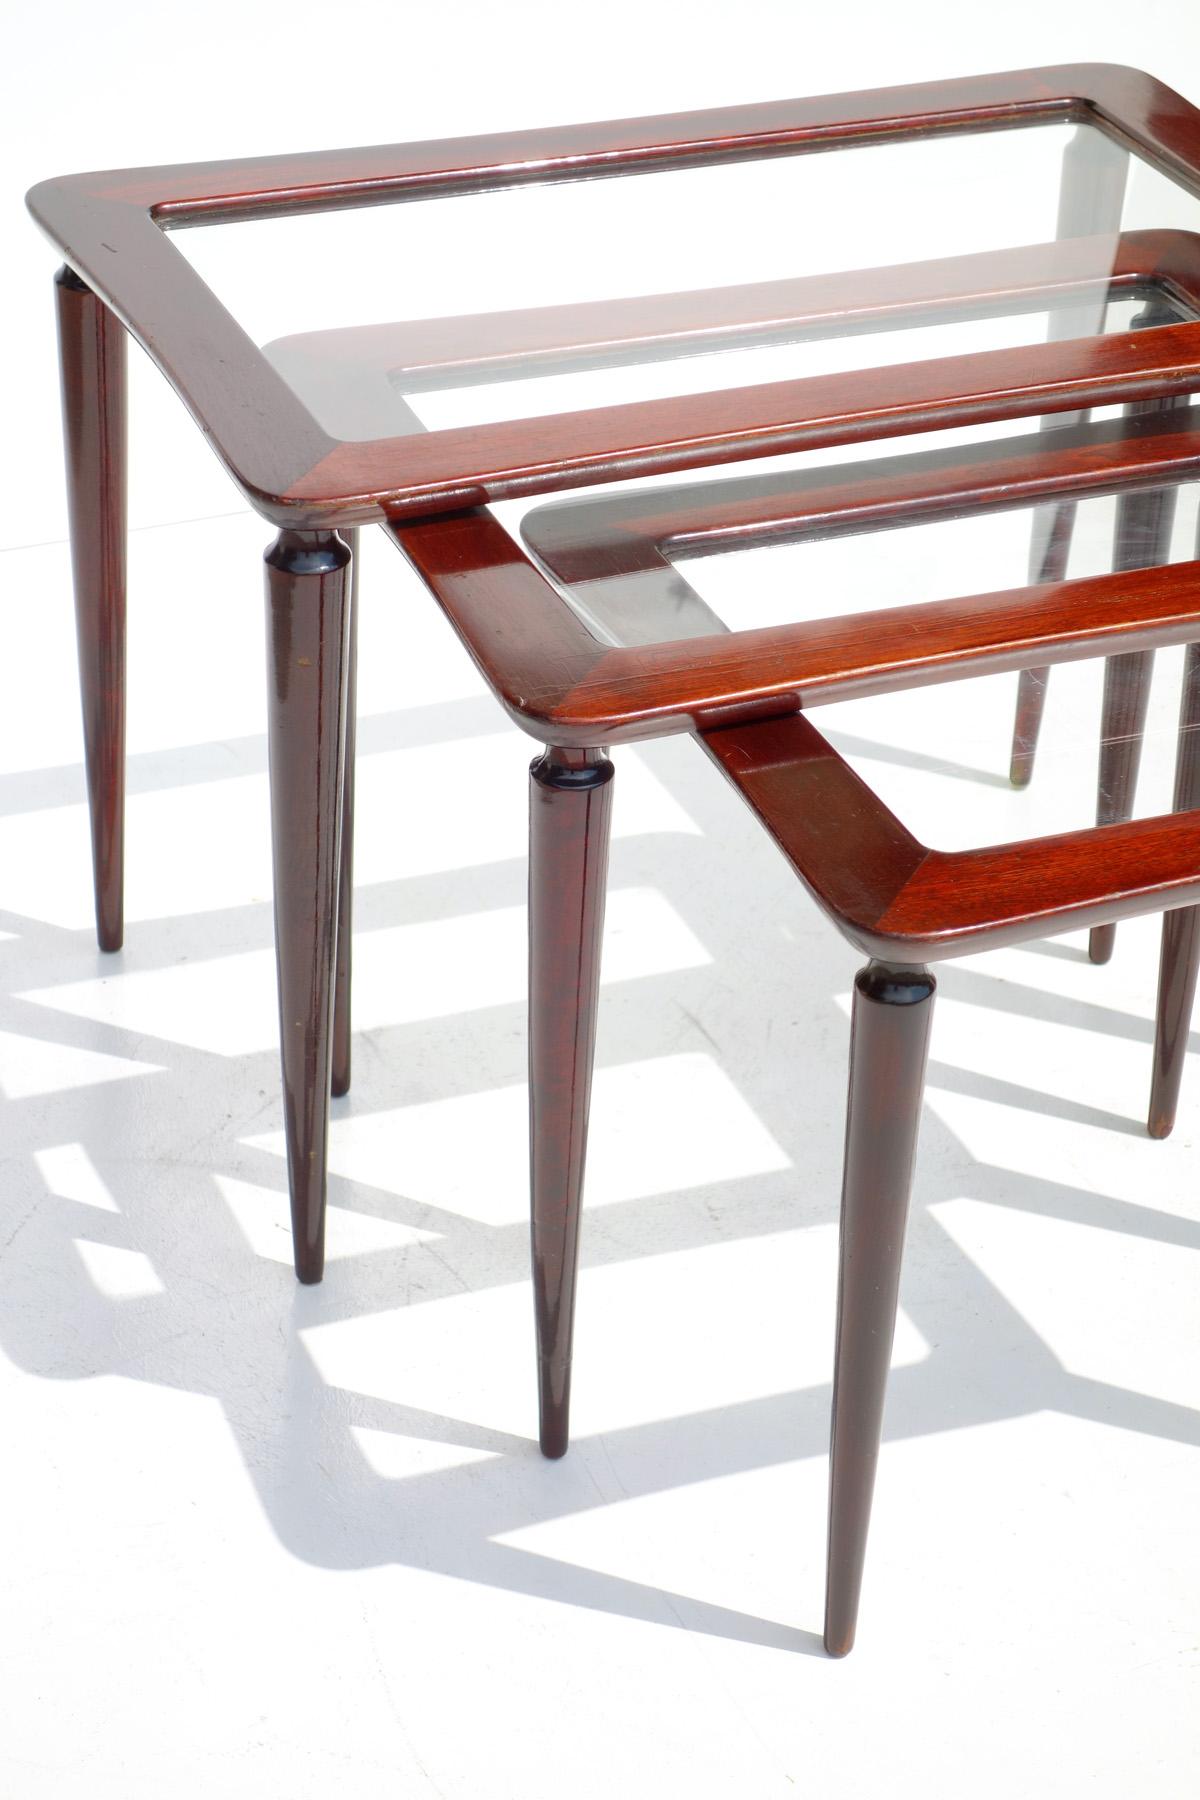 Set of Ico Parisi nesting tables Italy, 1950s
Ref: Ico Parisi Catalogo Ragionato p.505.

Excellent condiction
Glass in perfect condiction
Small restoration at a leg (look the picture).
  